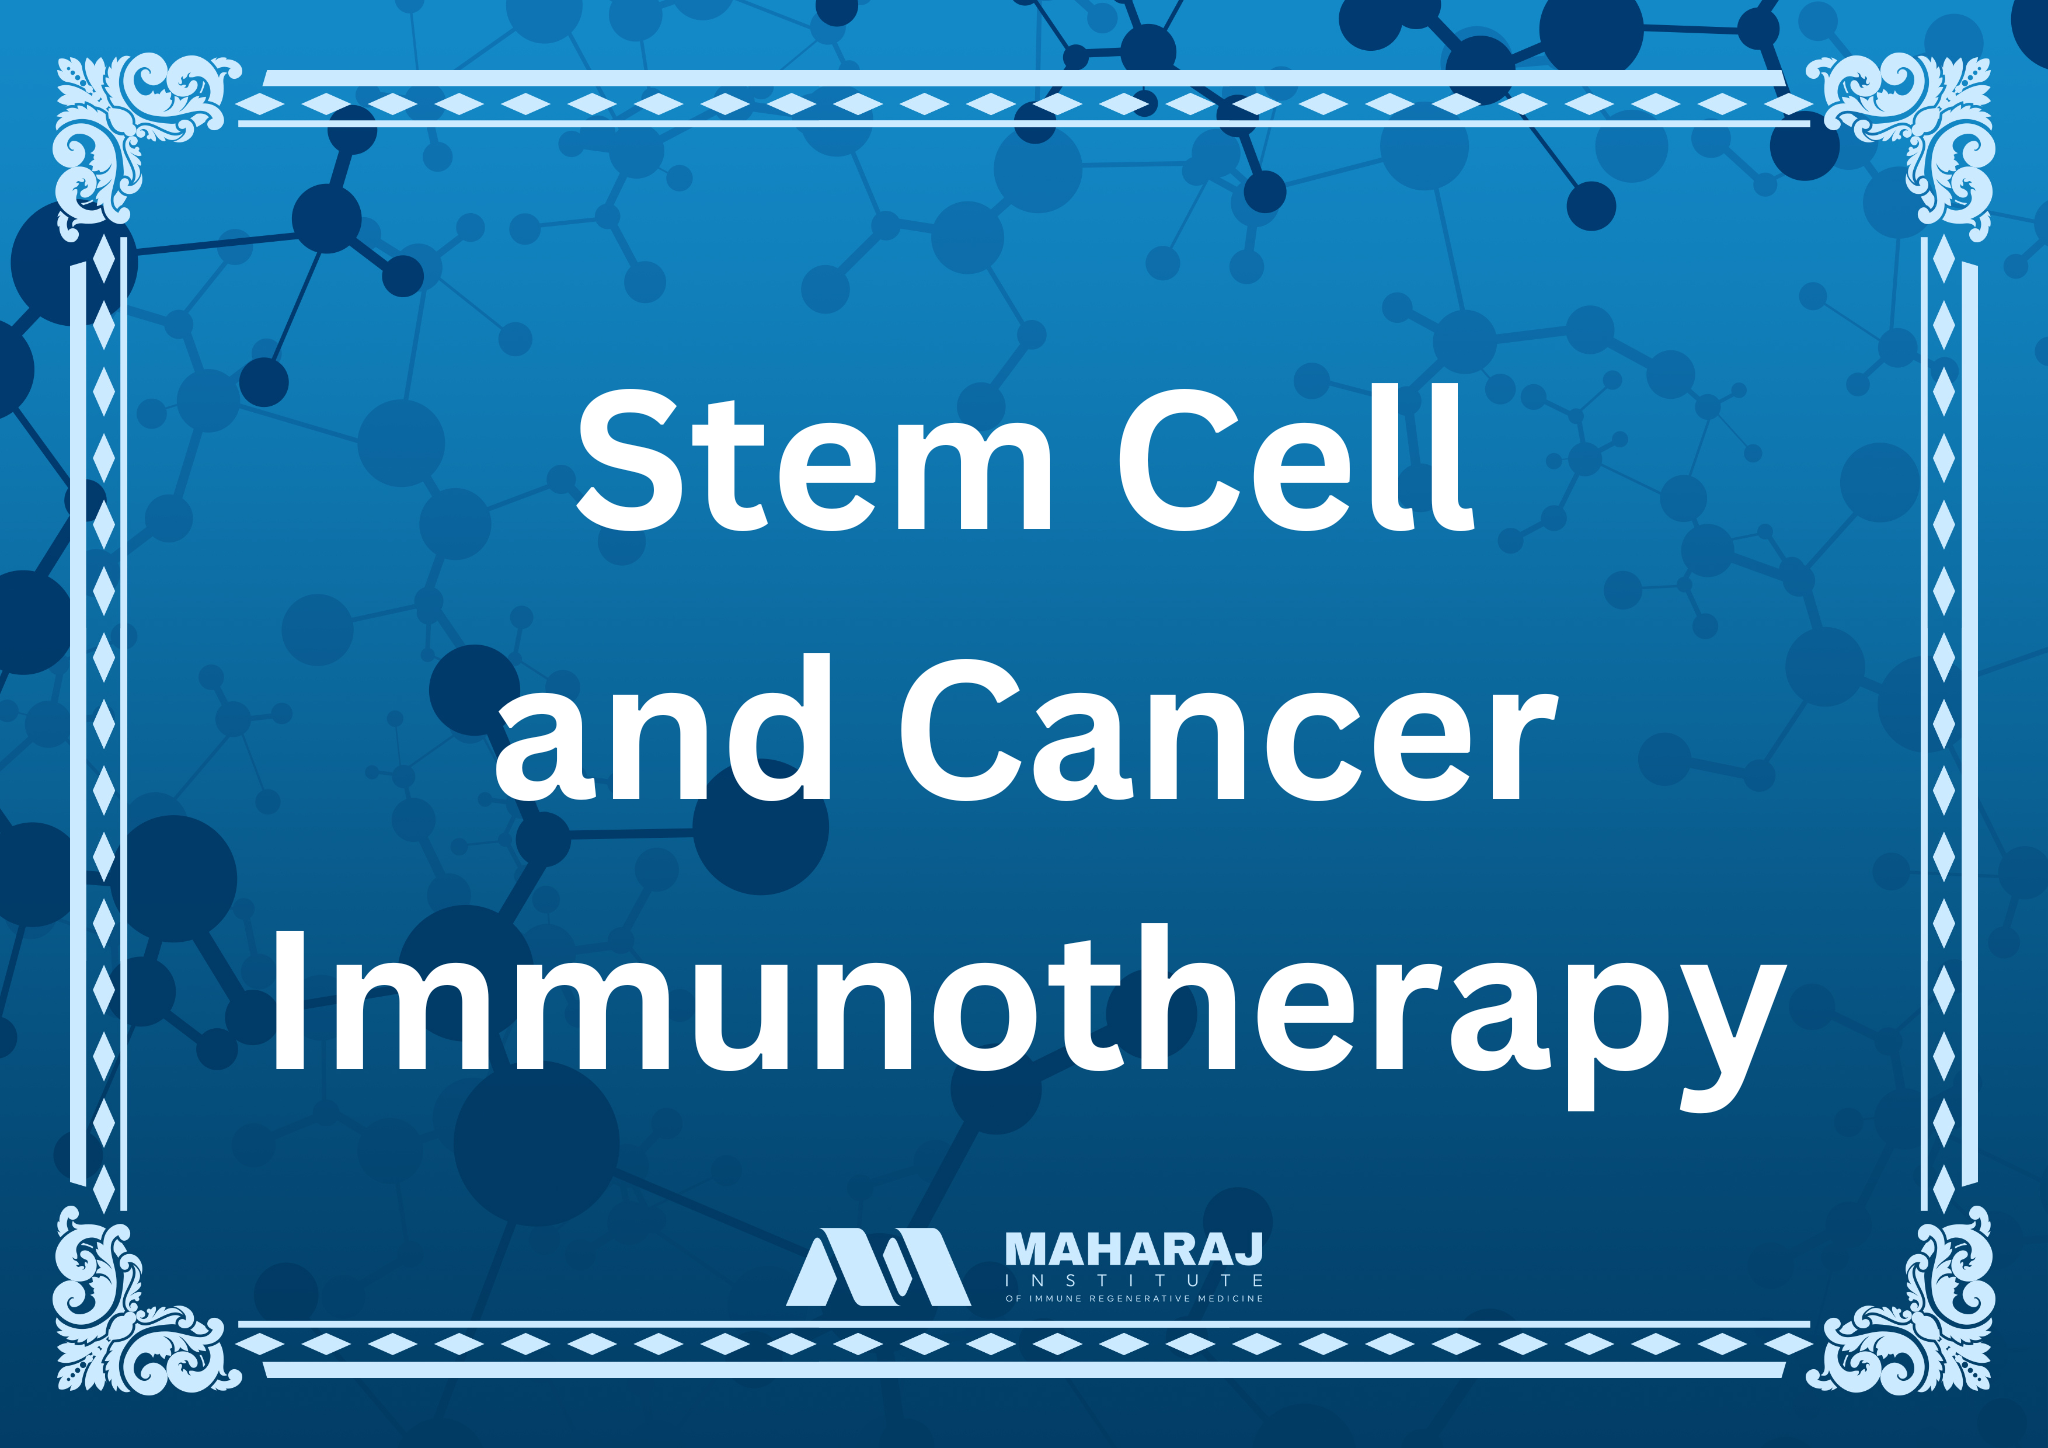 Stem Cell and Cancer Immunotherapy